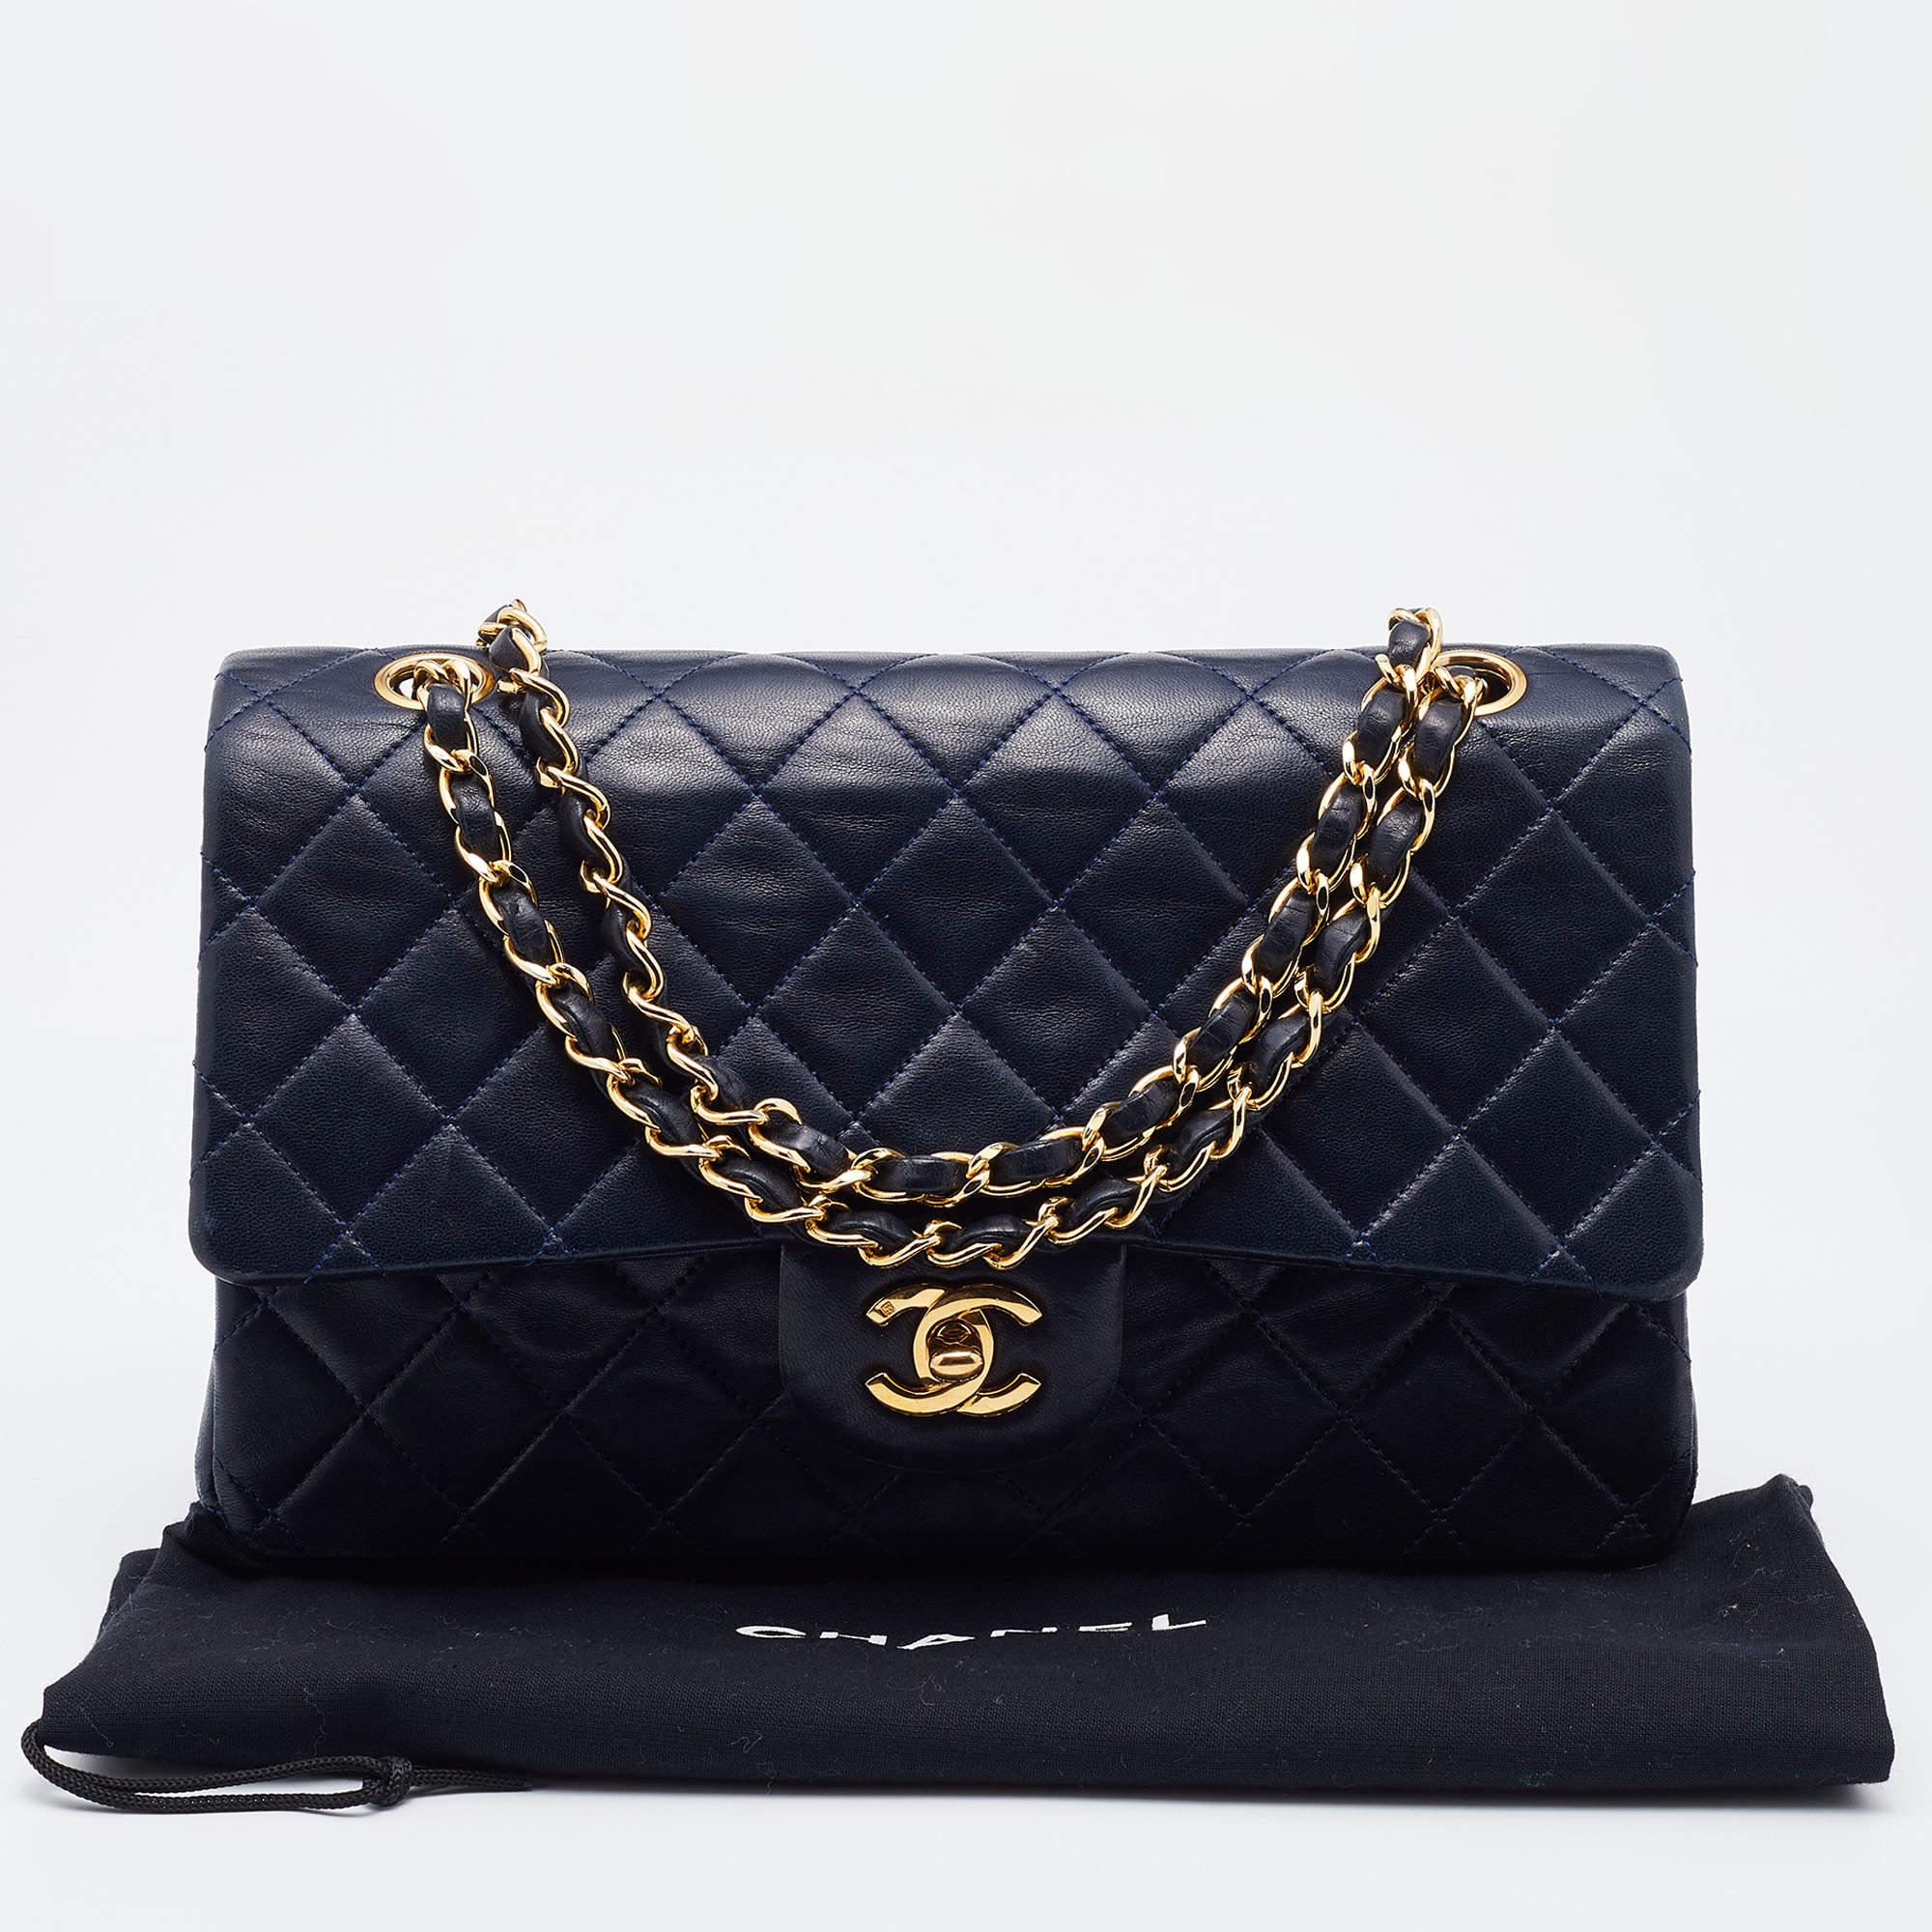 Chanel Navy Blue Quilted Leather Medium Classic Double Flap Bag 7